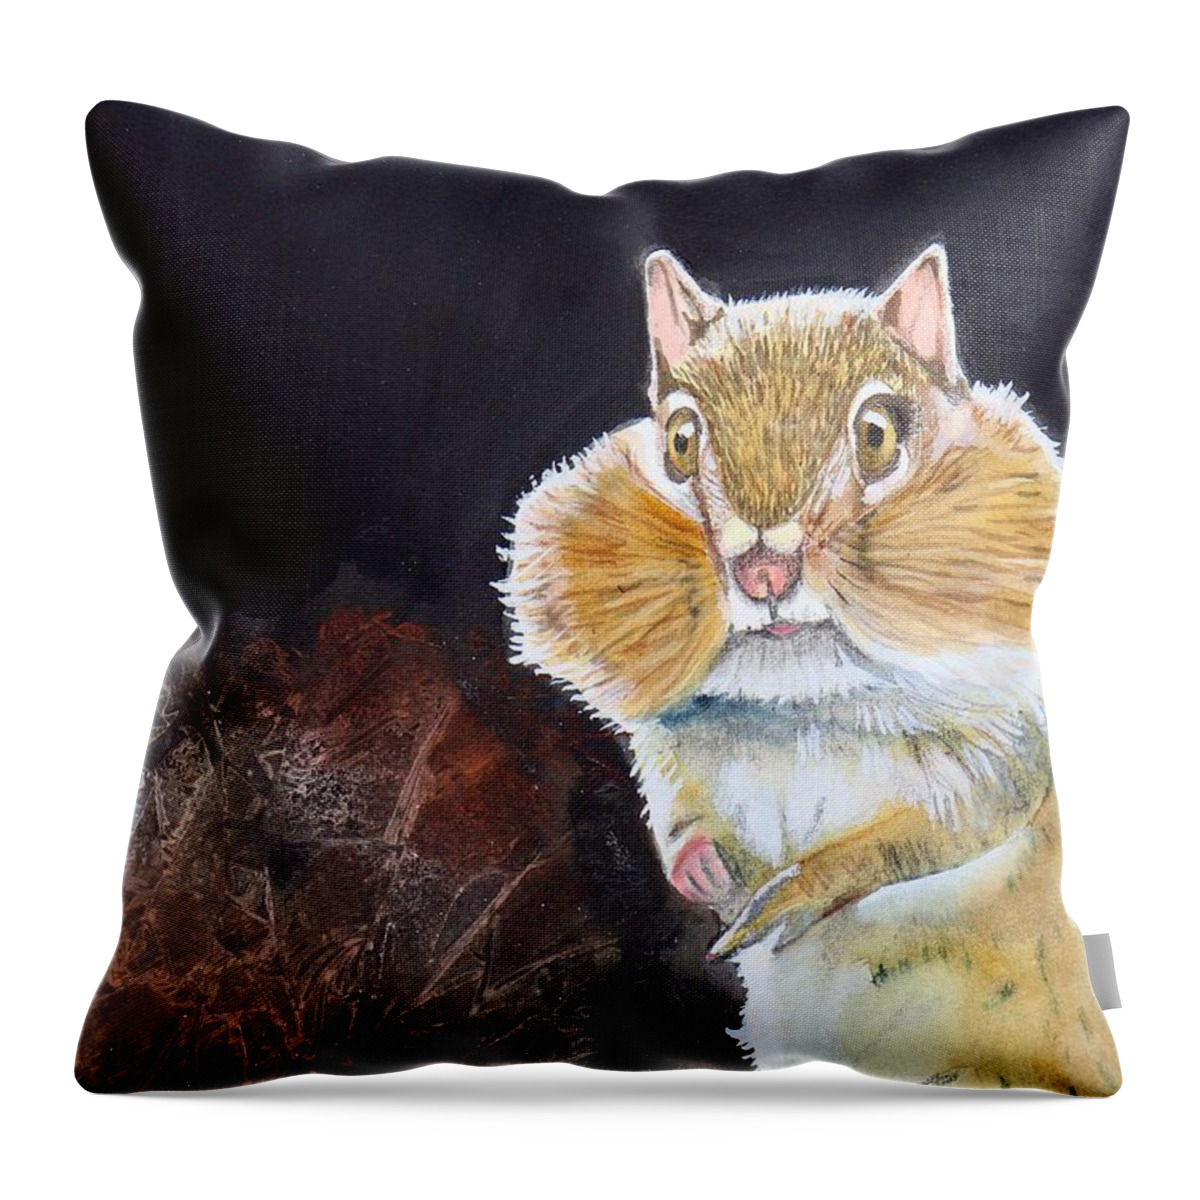 Black Throw Pillow featuring the painting Sweet Cheeks Watercolor by Kimberly Walker